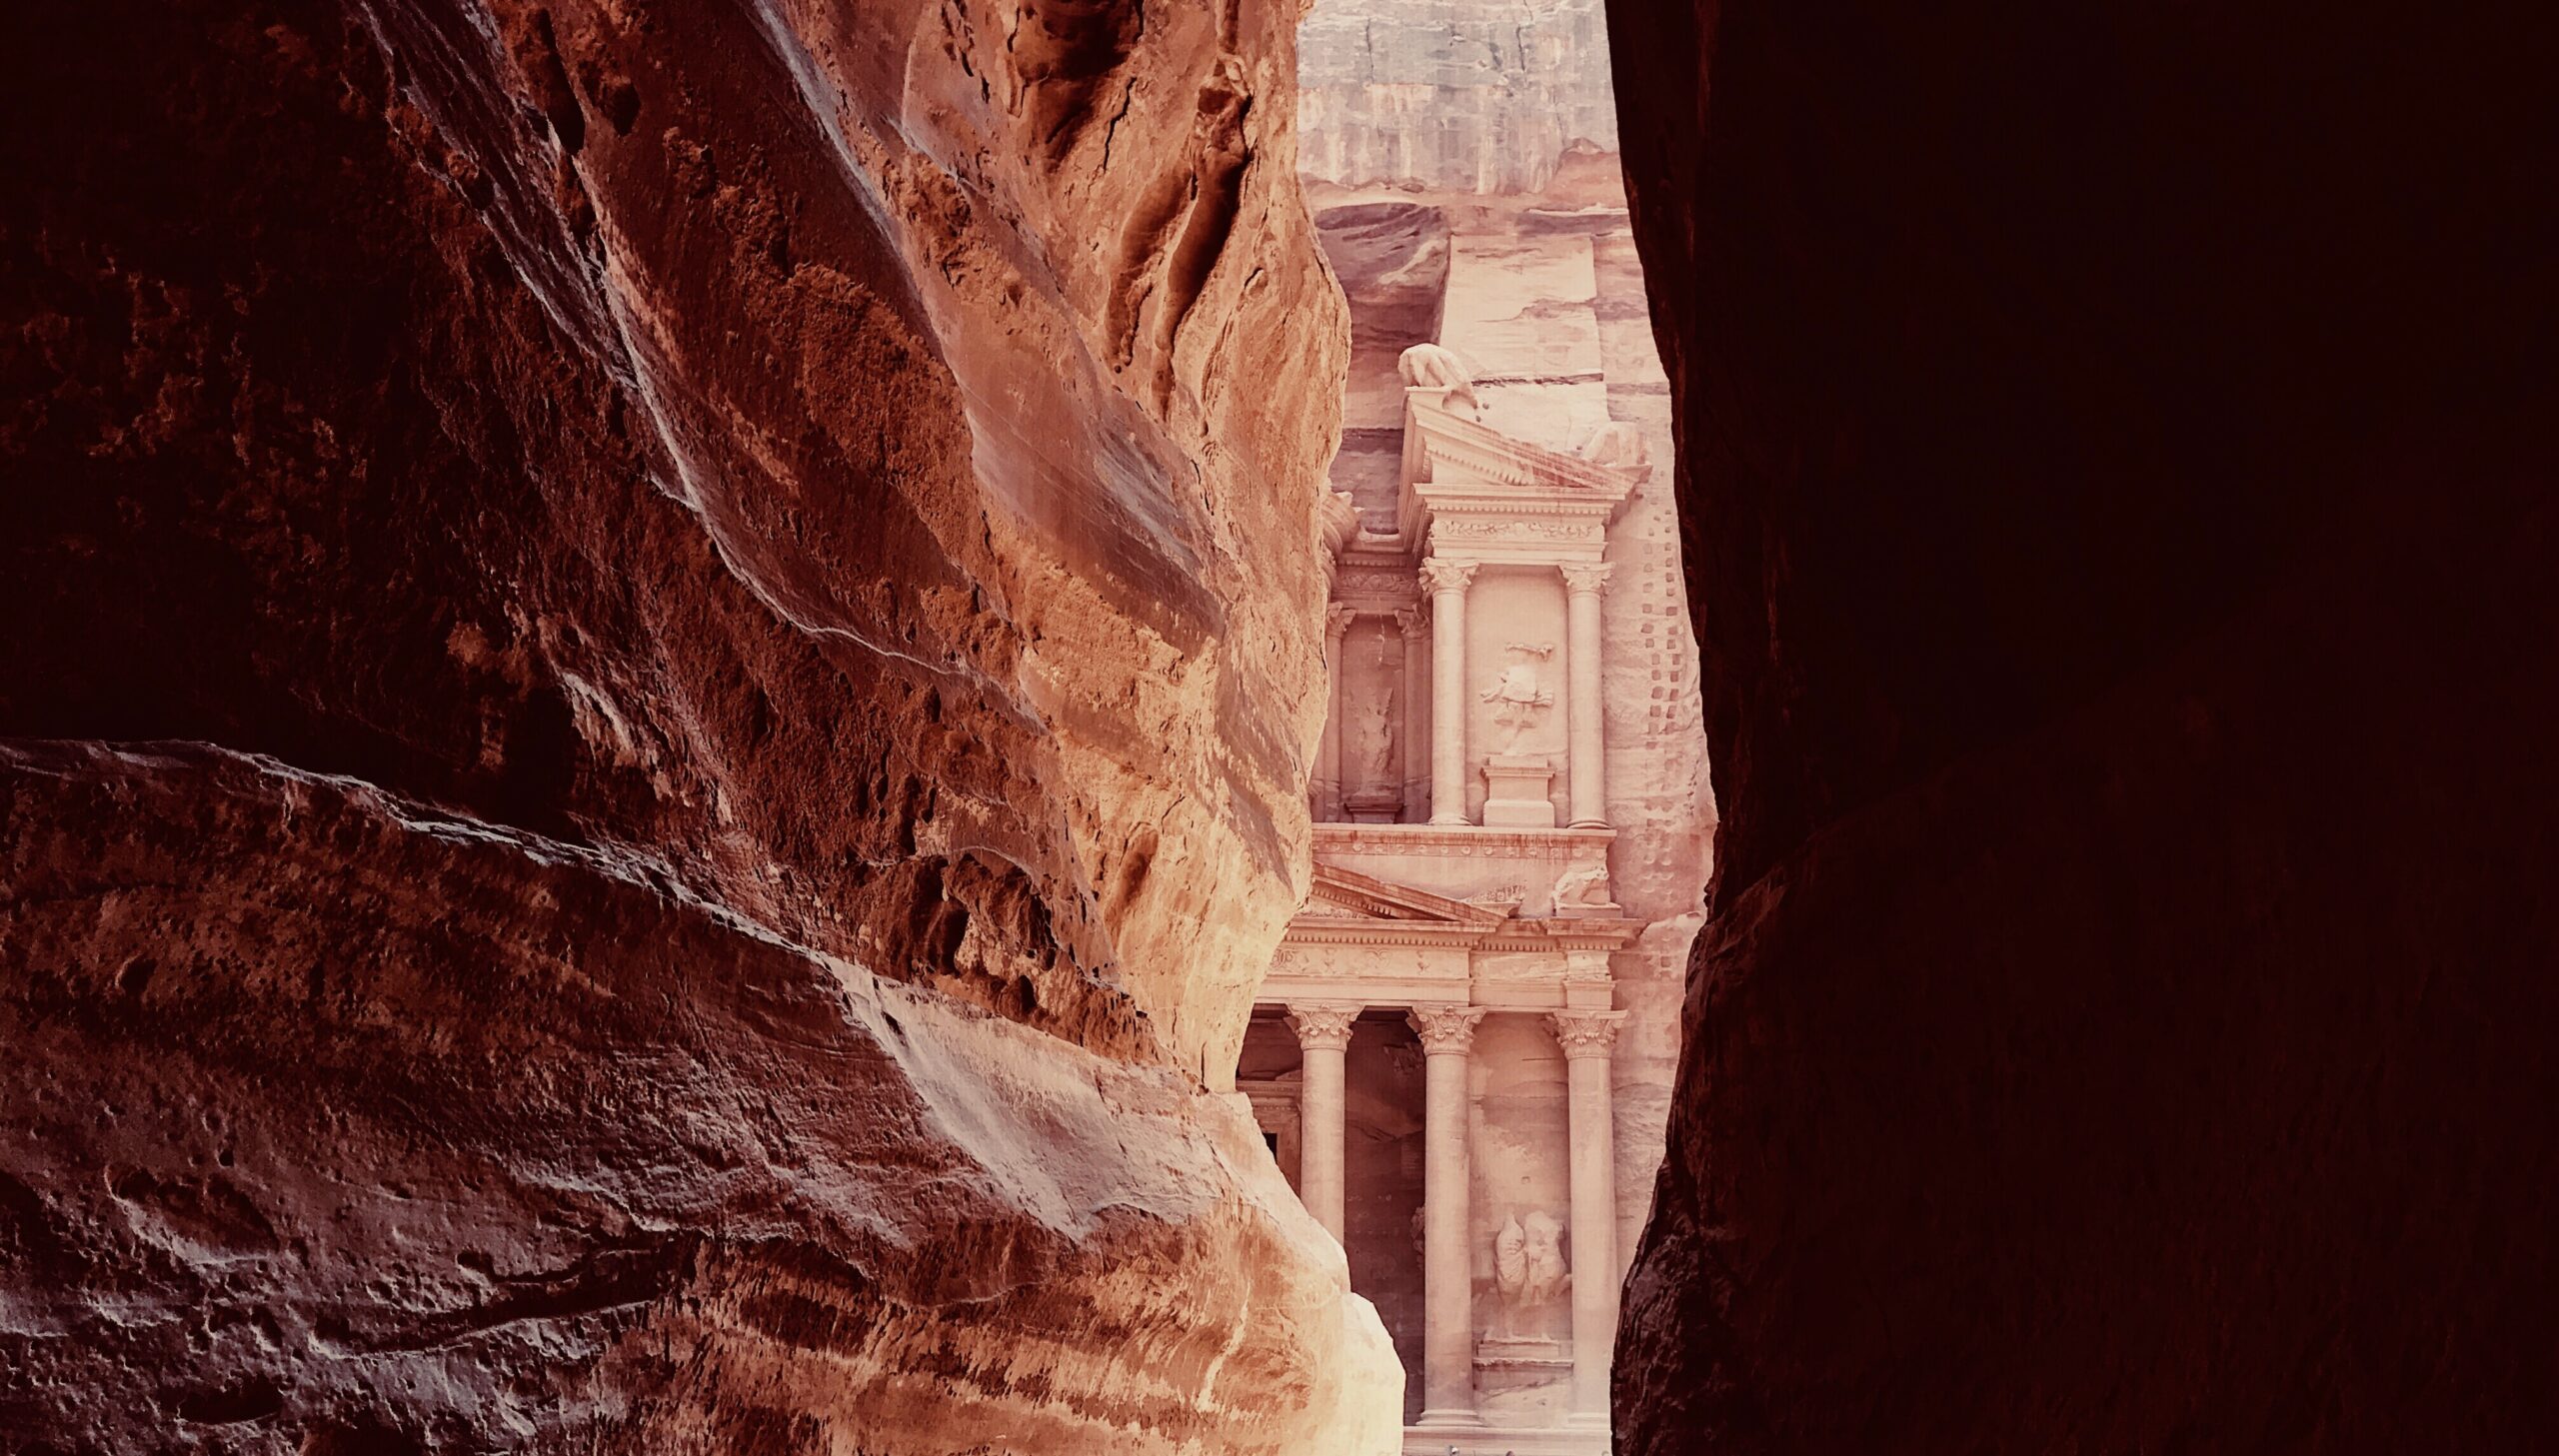 The Siq: Start your journey by walking through the Siq, a narrow canyon that serves as the main entrance to Petra. The towering cliffs on either side create a dramatic and awe-inspiring entrance.